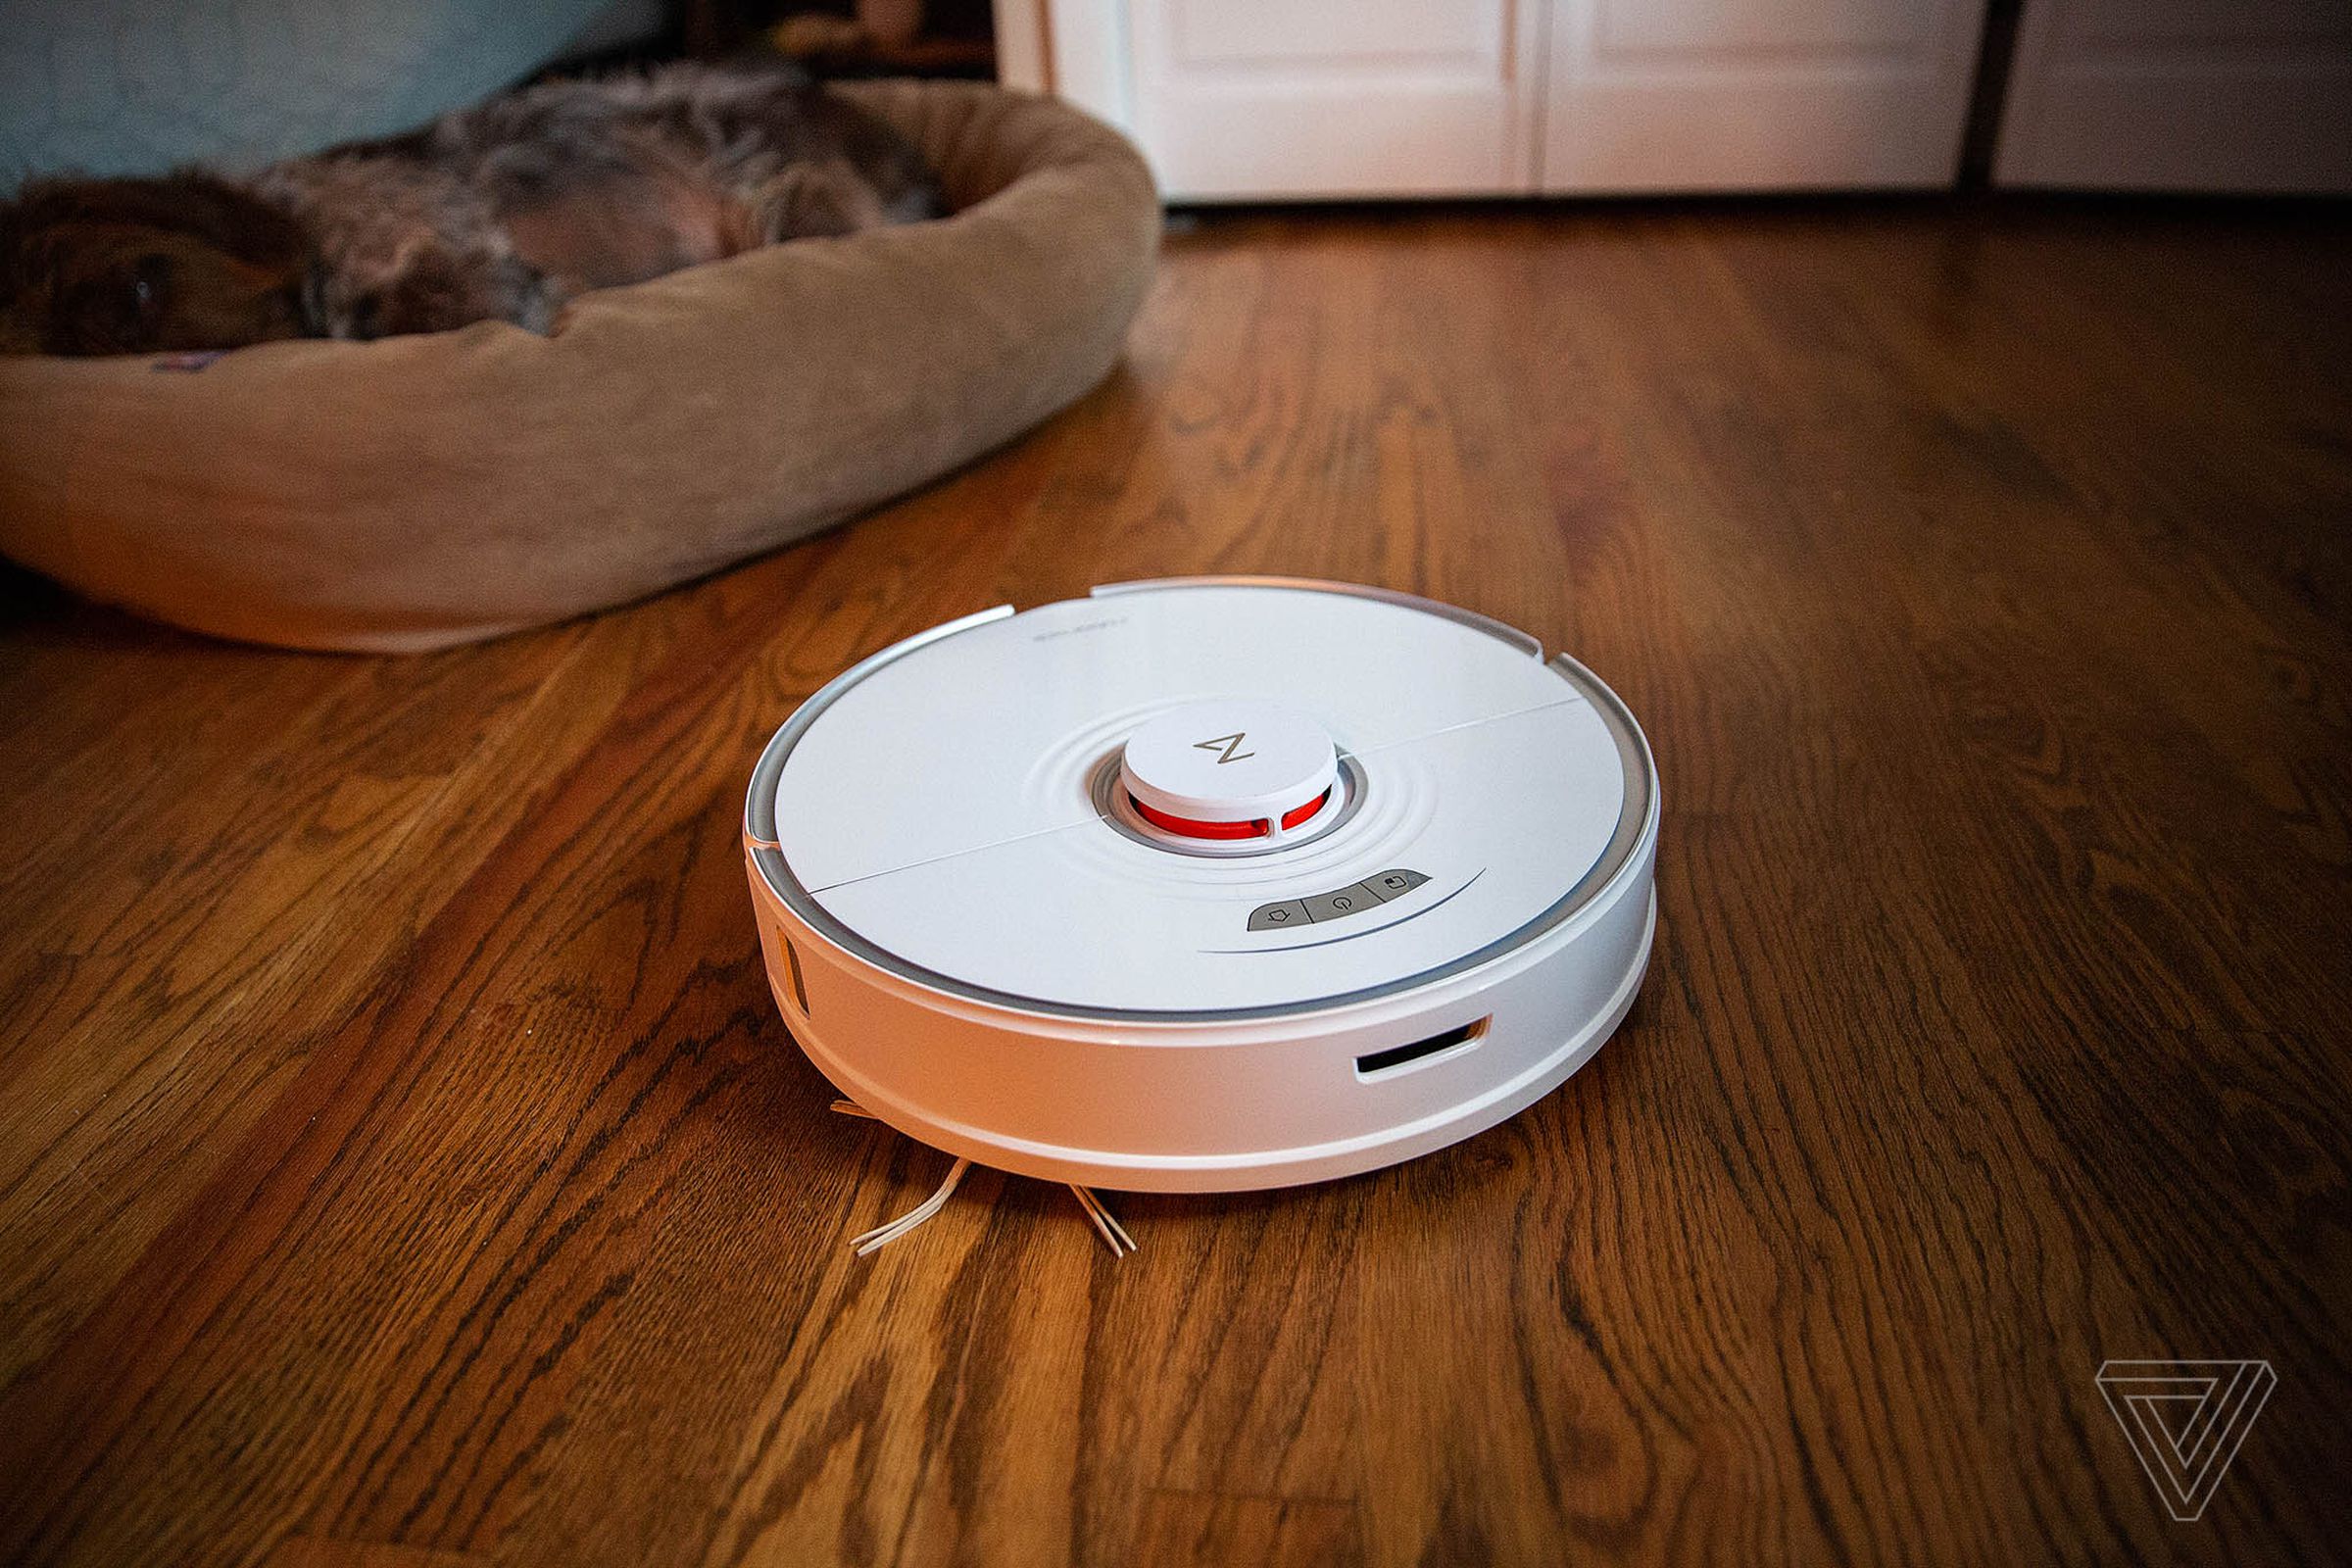 The Roborock S7 has four vacuum modes, the quietest emitting just 59 dB in testing. But even the loudest (76 dB) wasn’t enough to rouse my sleeping dog.